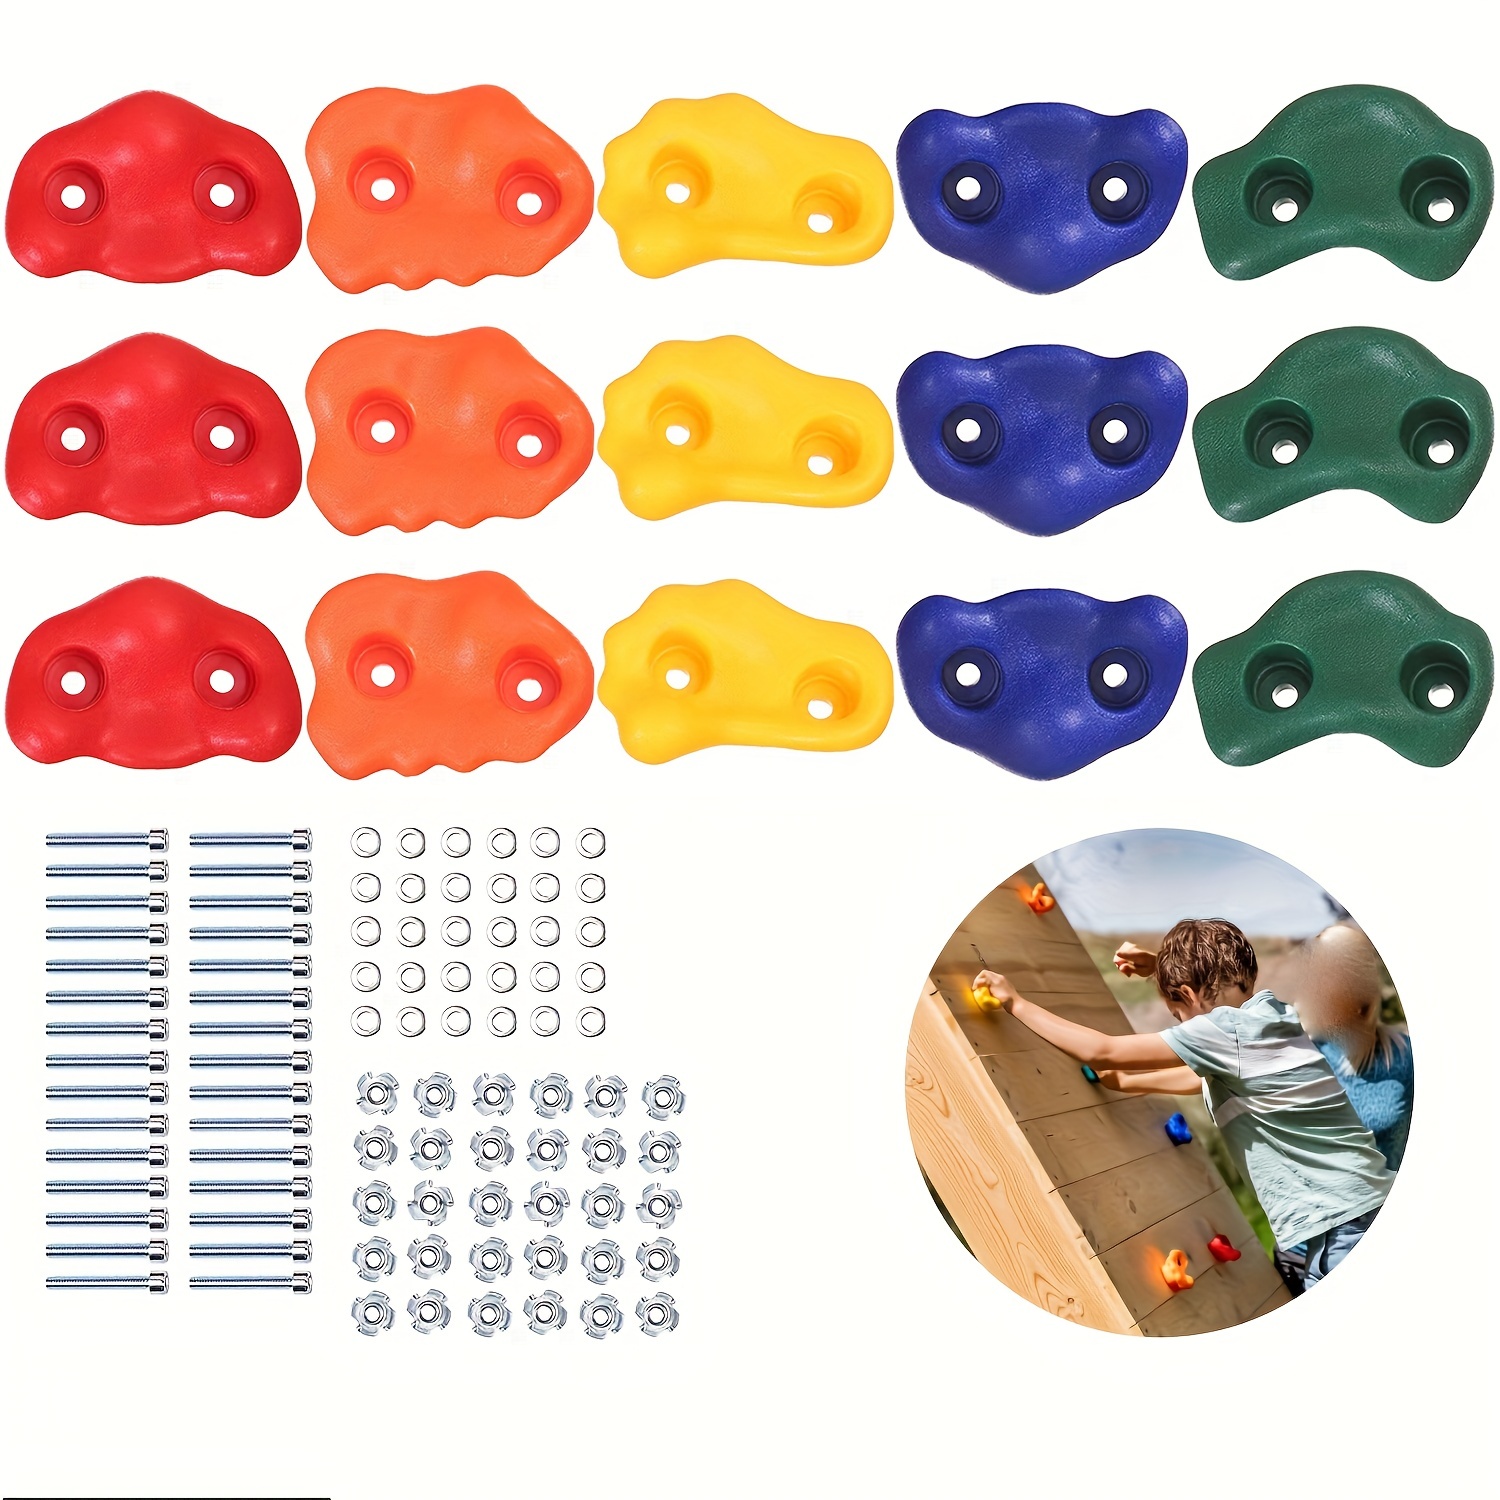 

15pcs/set Rock Climbing Holds, Indoor And Outdoor Playground Rock Wall Climbing Accessories With Mounting Hardware